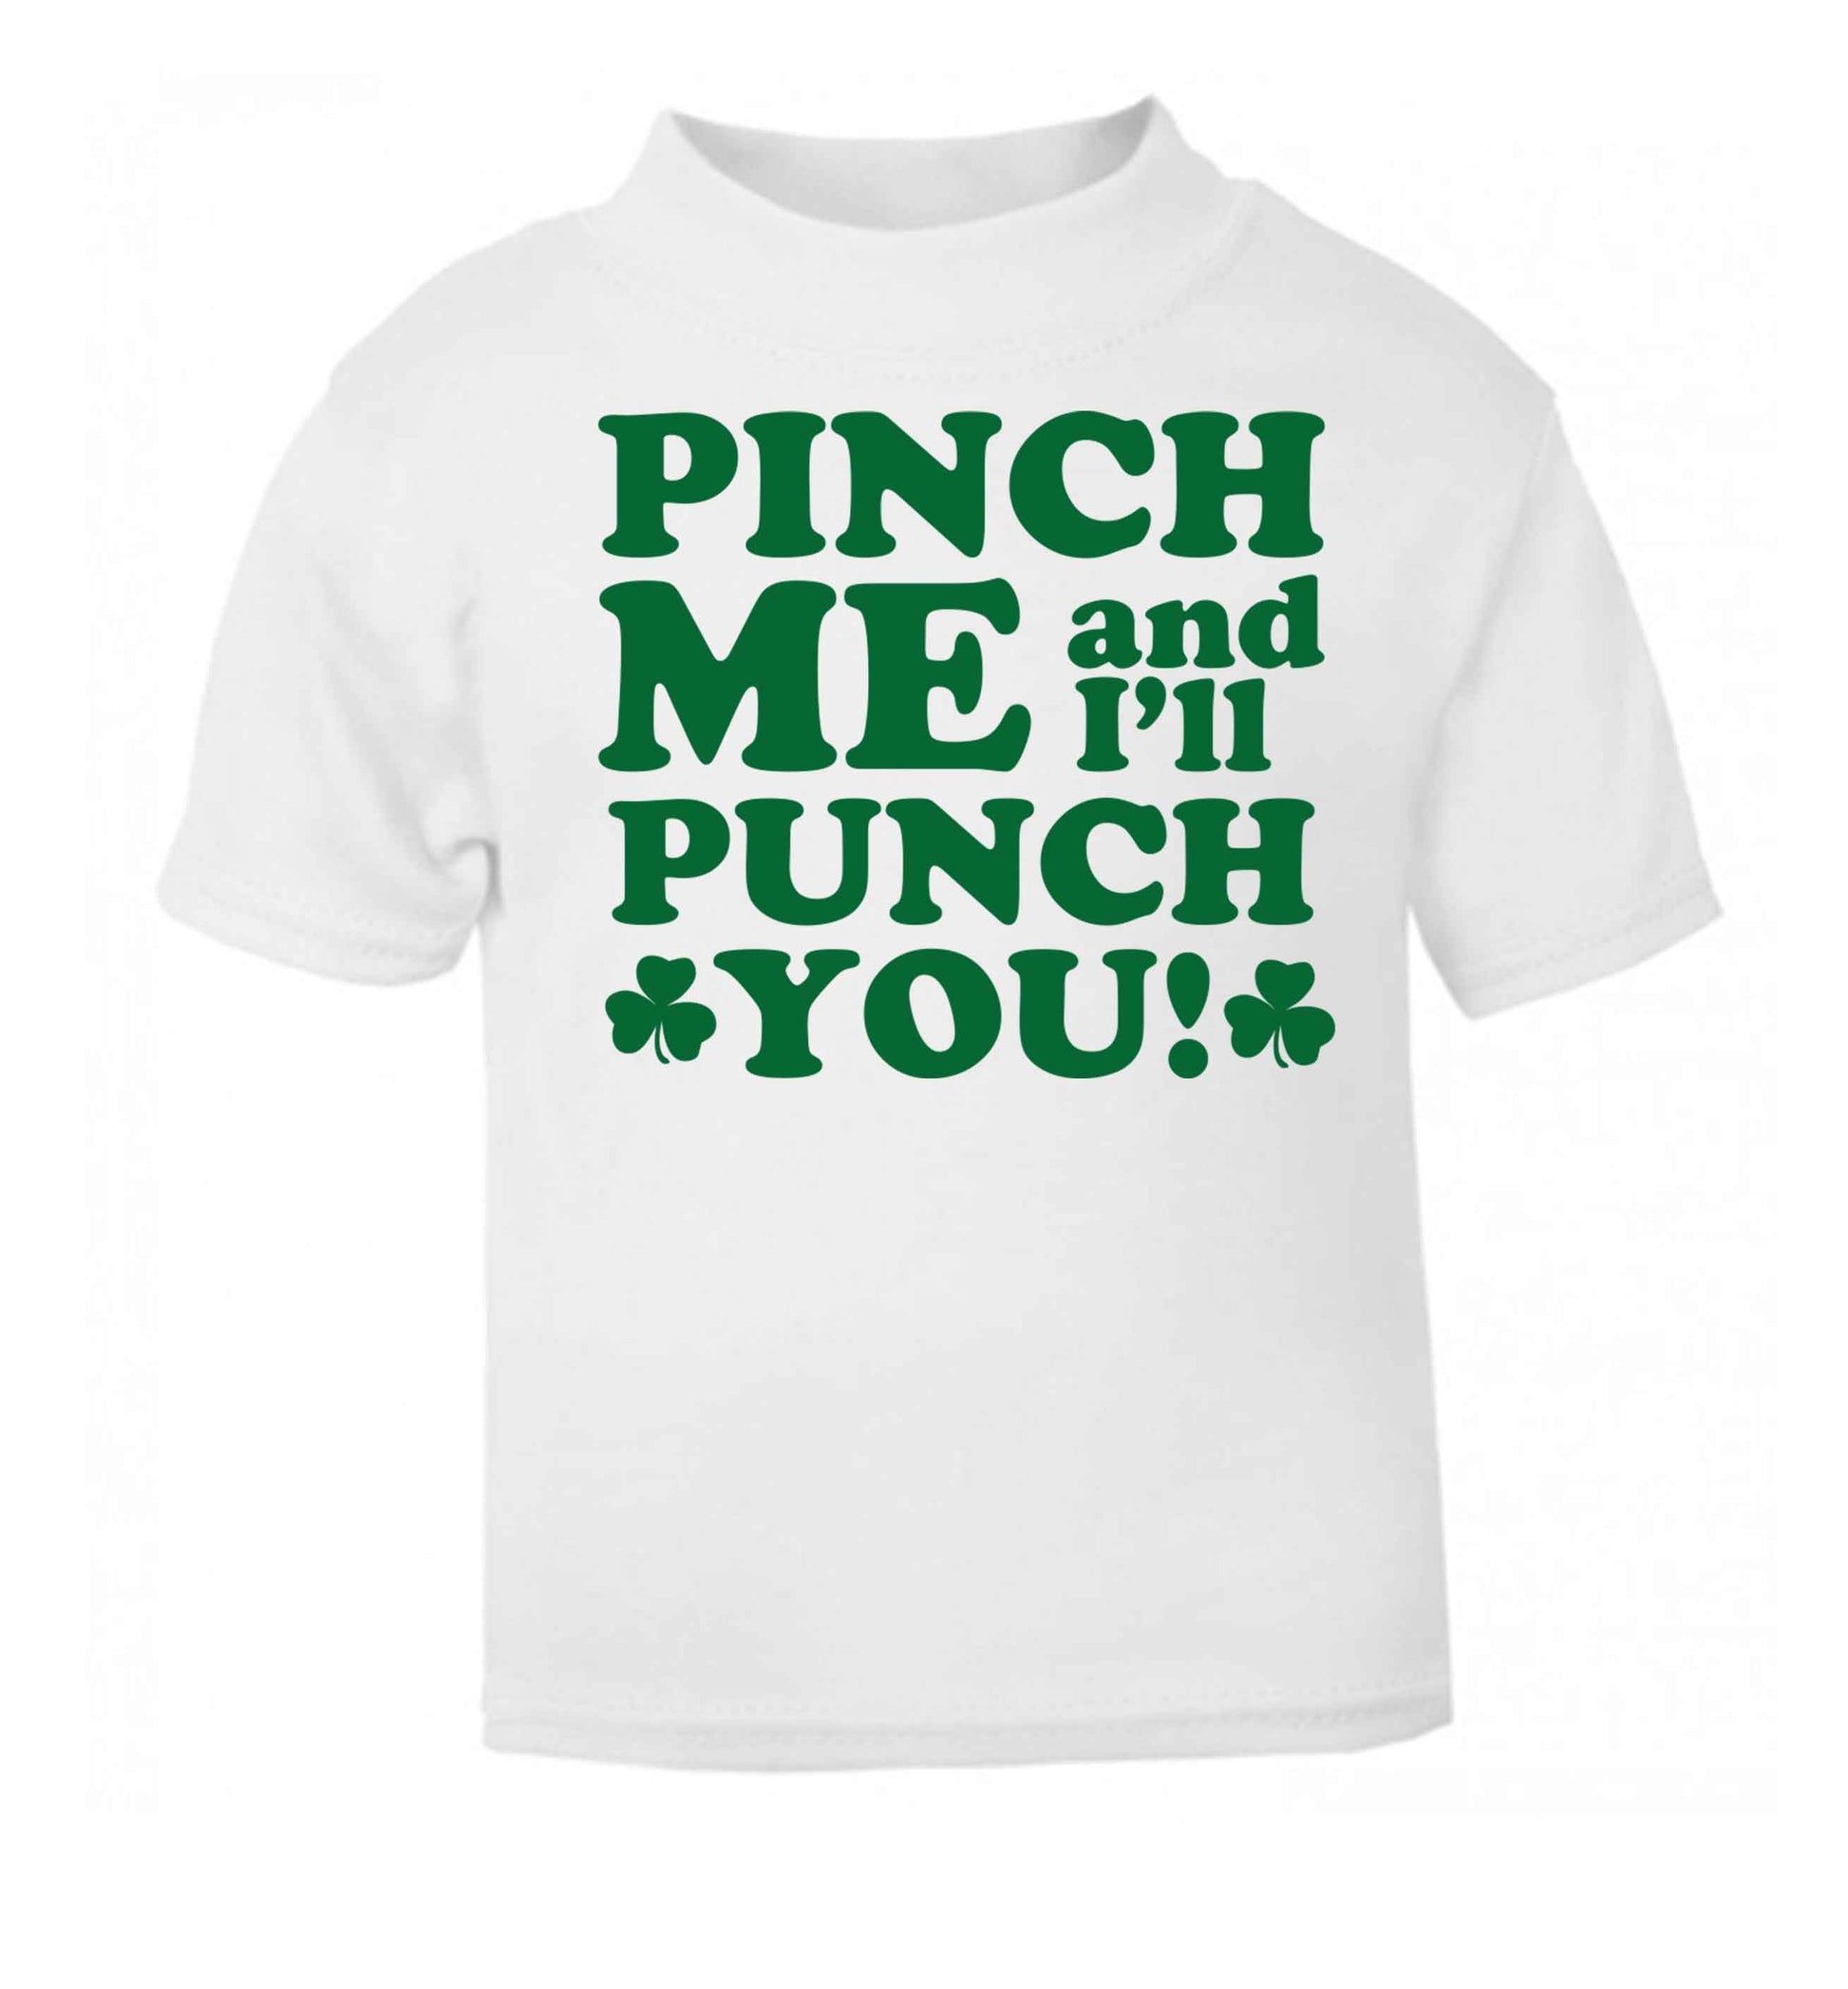 Pinch me and I'll punch you white baby toddler Tshirt 2 Years